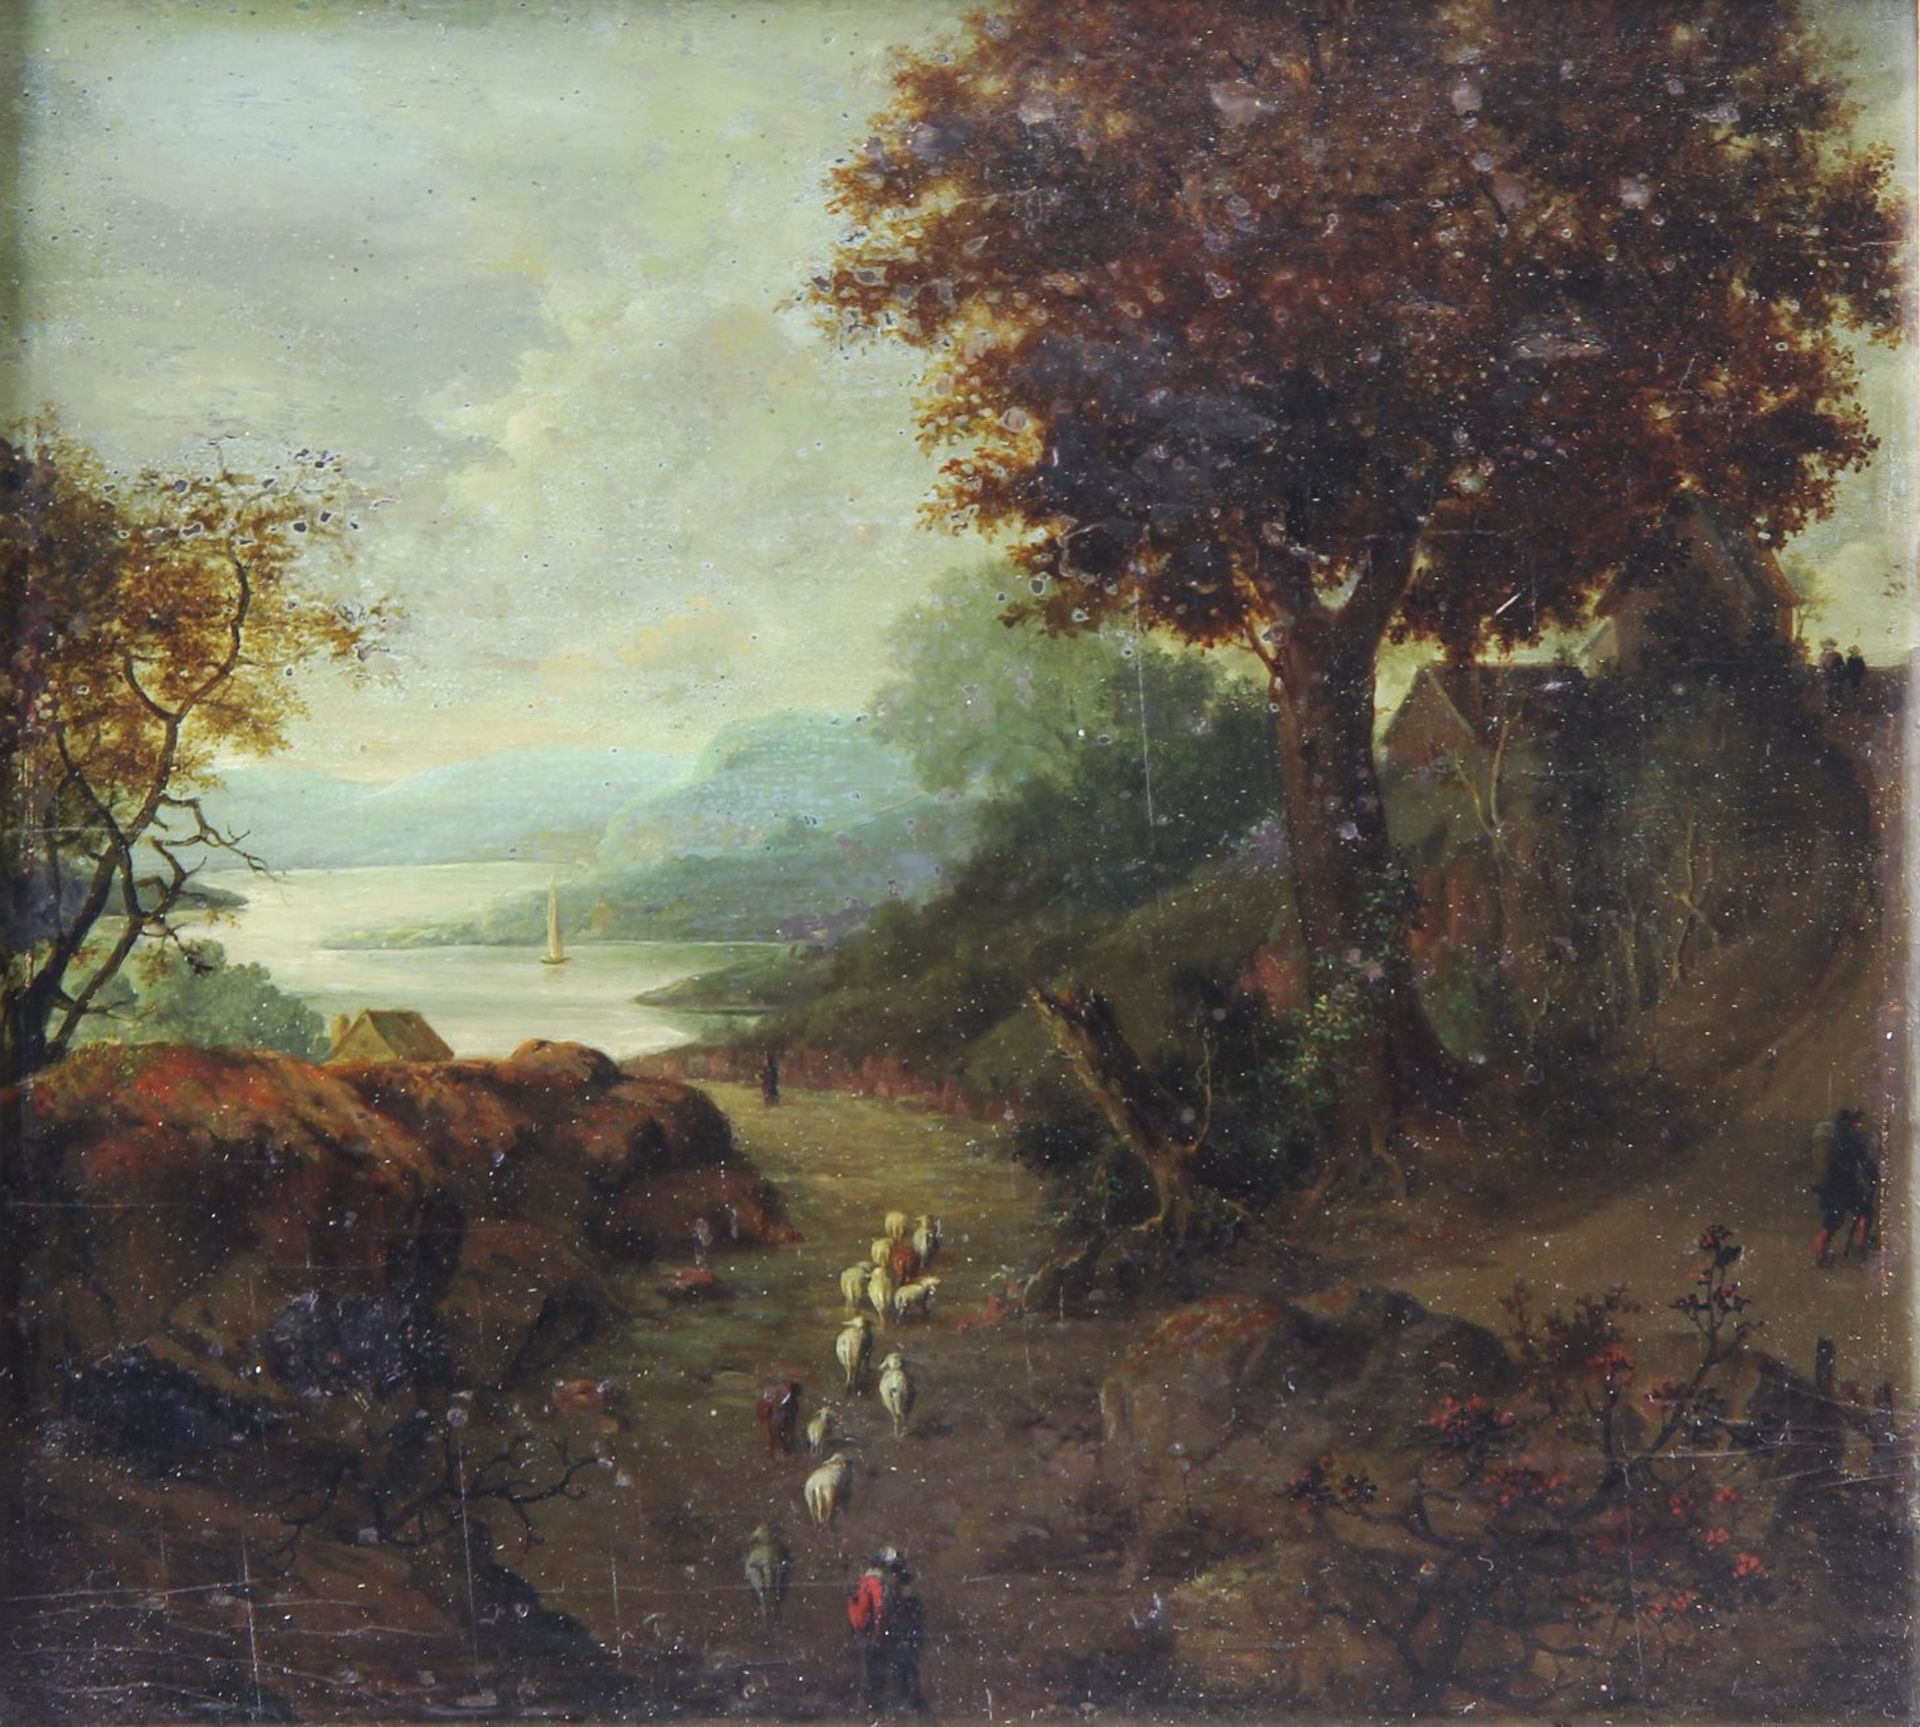 German painter of the 18th/19th century Painting, oil on board, landscape with flock of sheep, 17